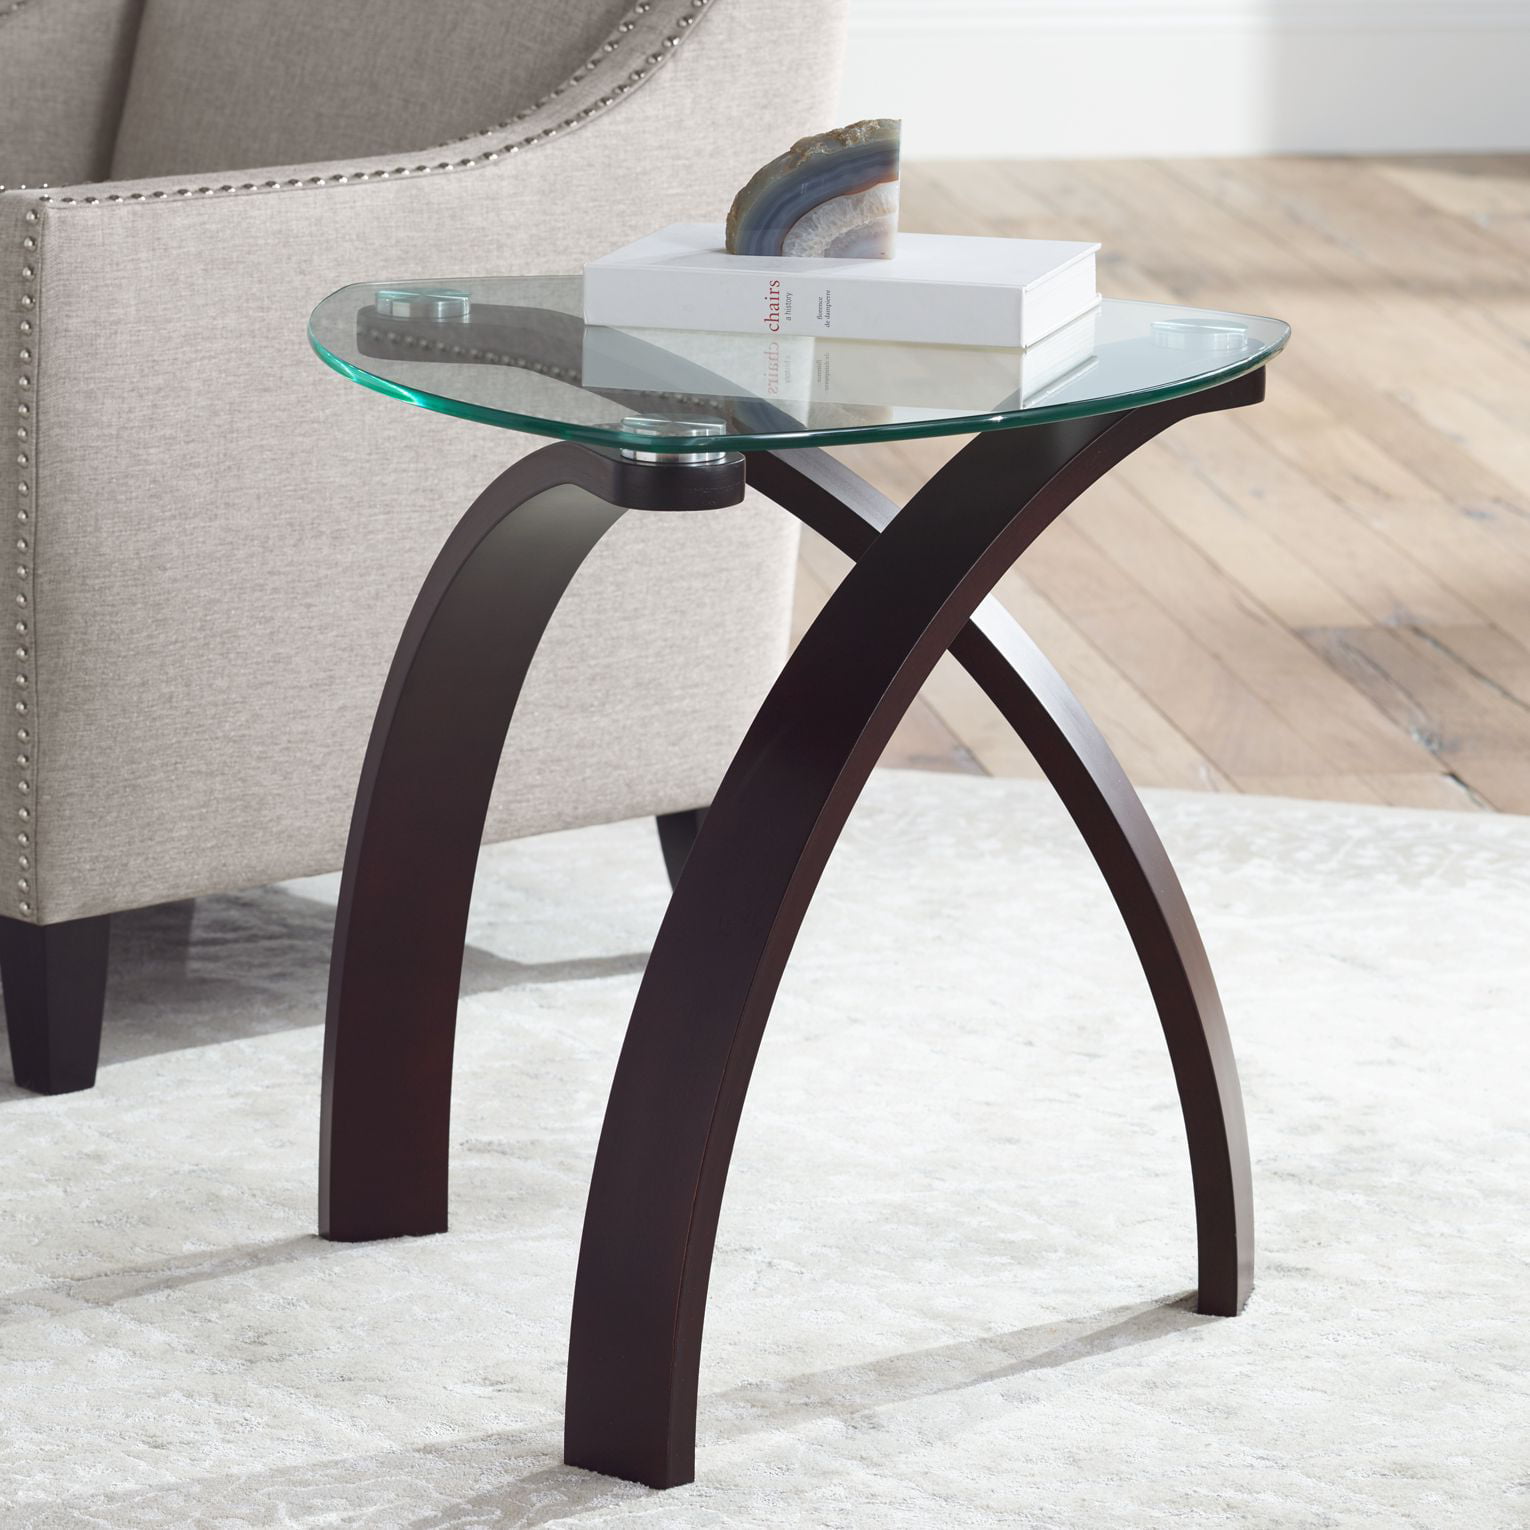 Round End Table Clear Glass Tabletop Lower Shelf Storage Espresso Finish